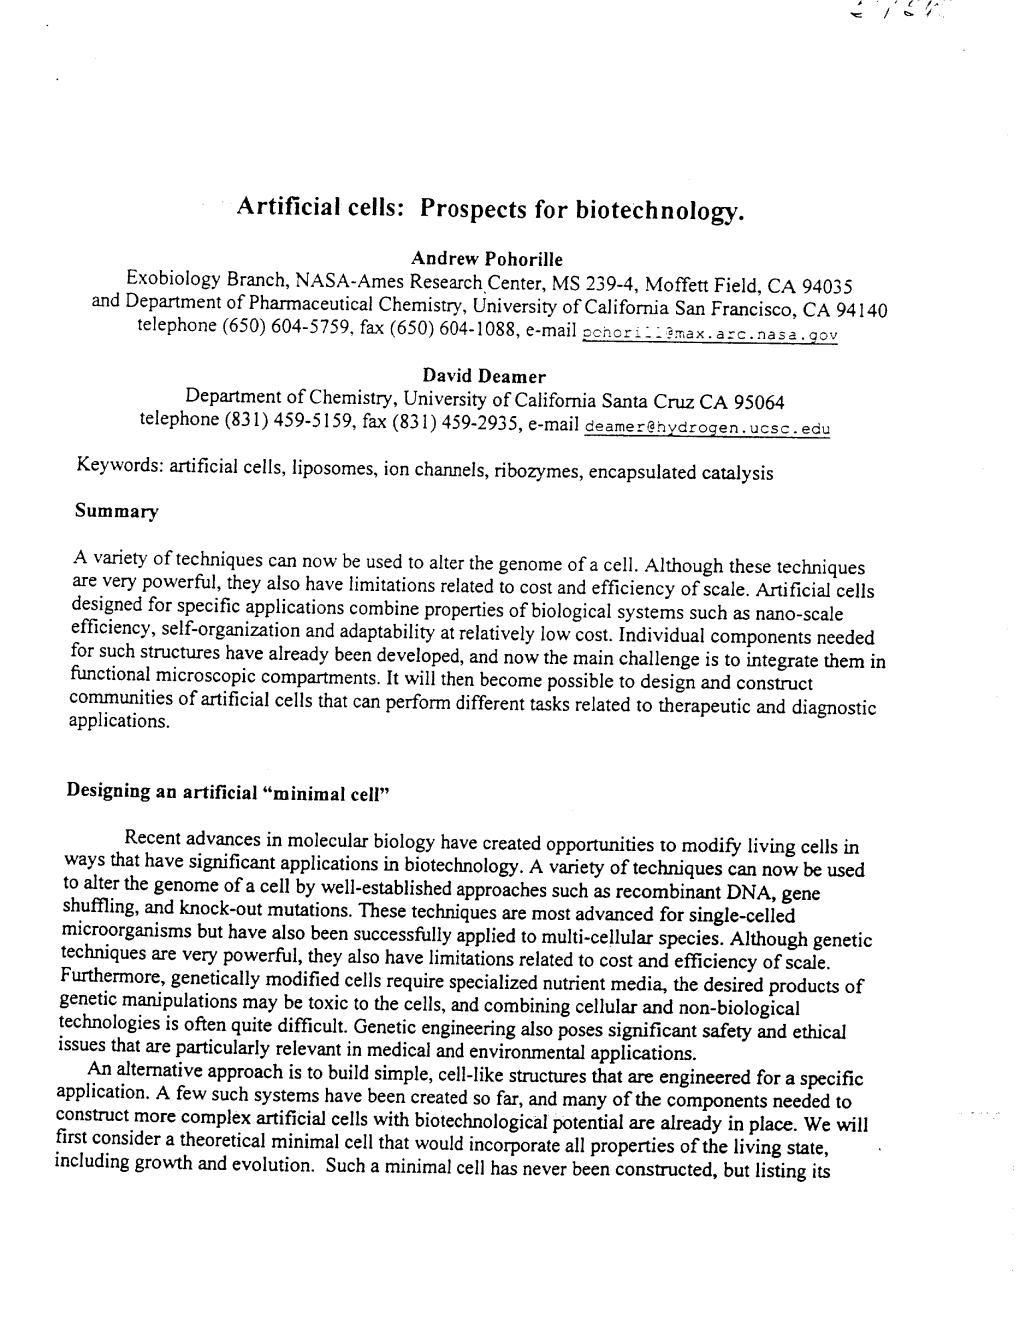 Artificial Cells: Prospects for Biotechnology